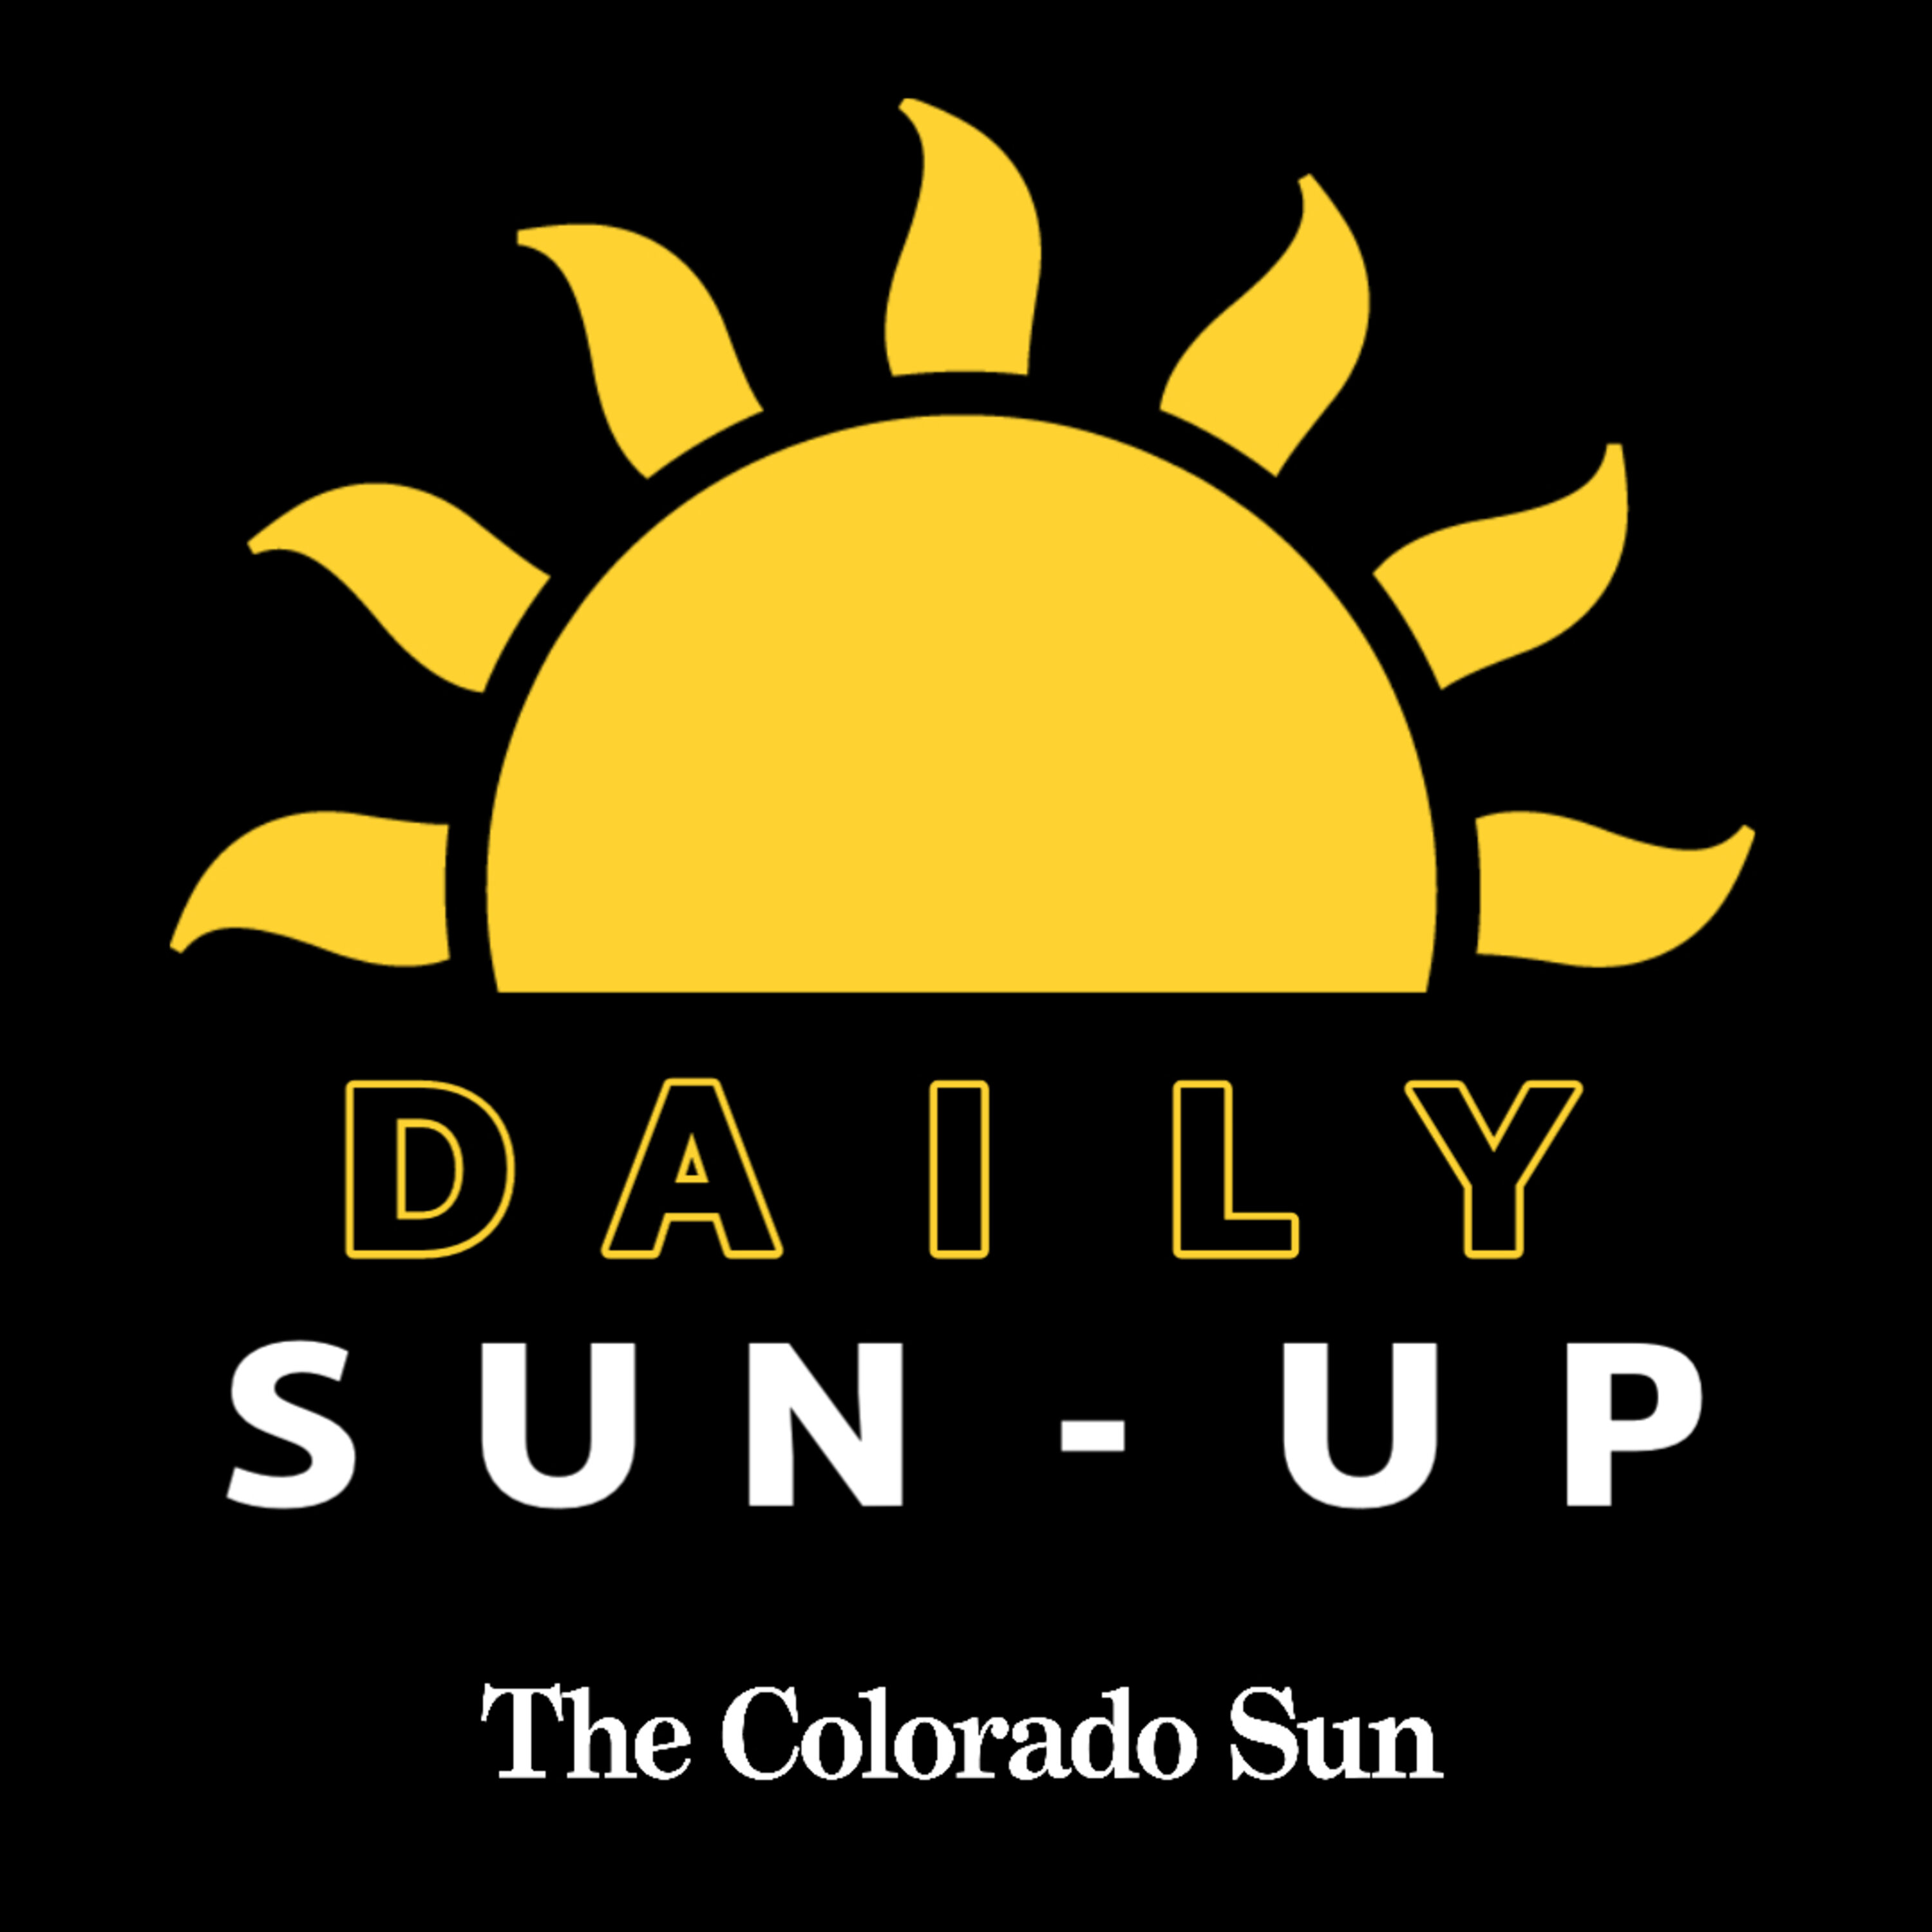 Colorado Sun Daily Sun-Up: Combining Astronomy and Photography, The Eagle County Resort